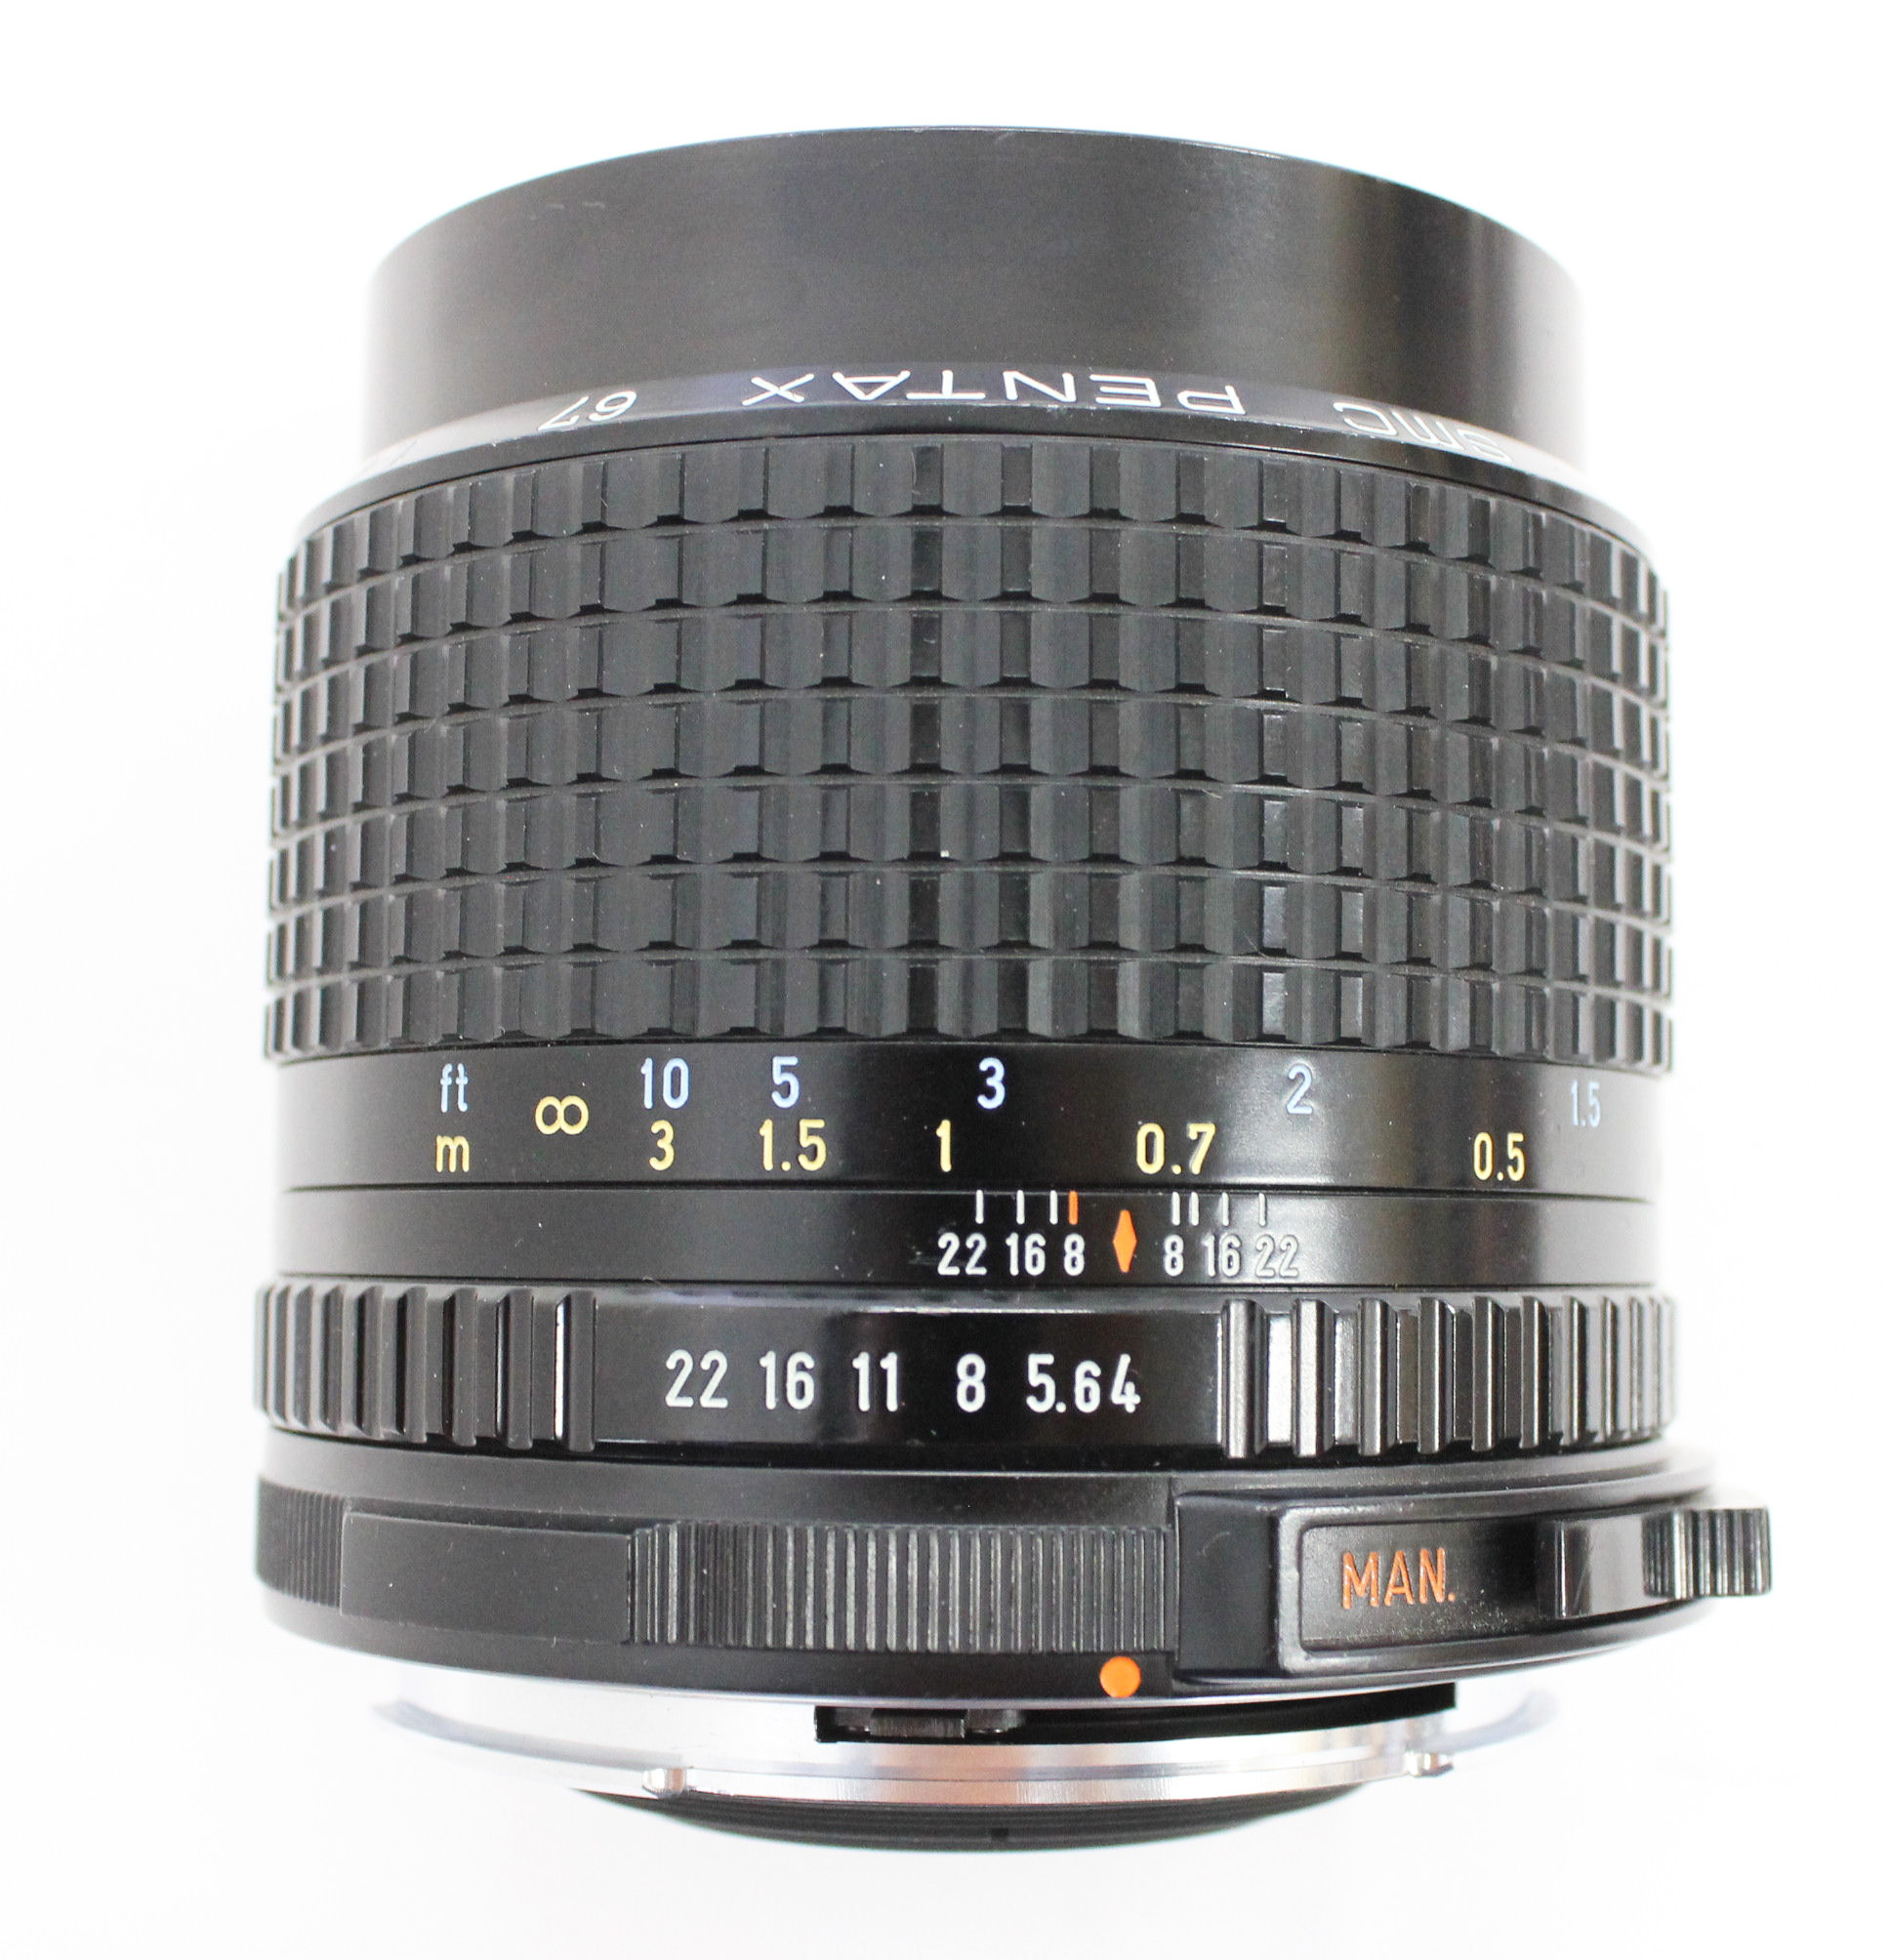  SMC Pentax 67 55mm F/4 Lens for Pentax 67 67II from Japan Photo 3